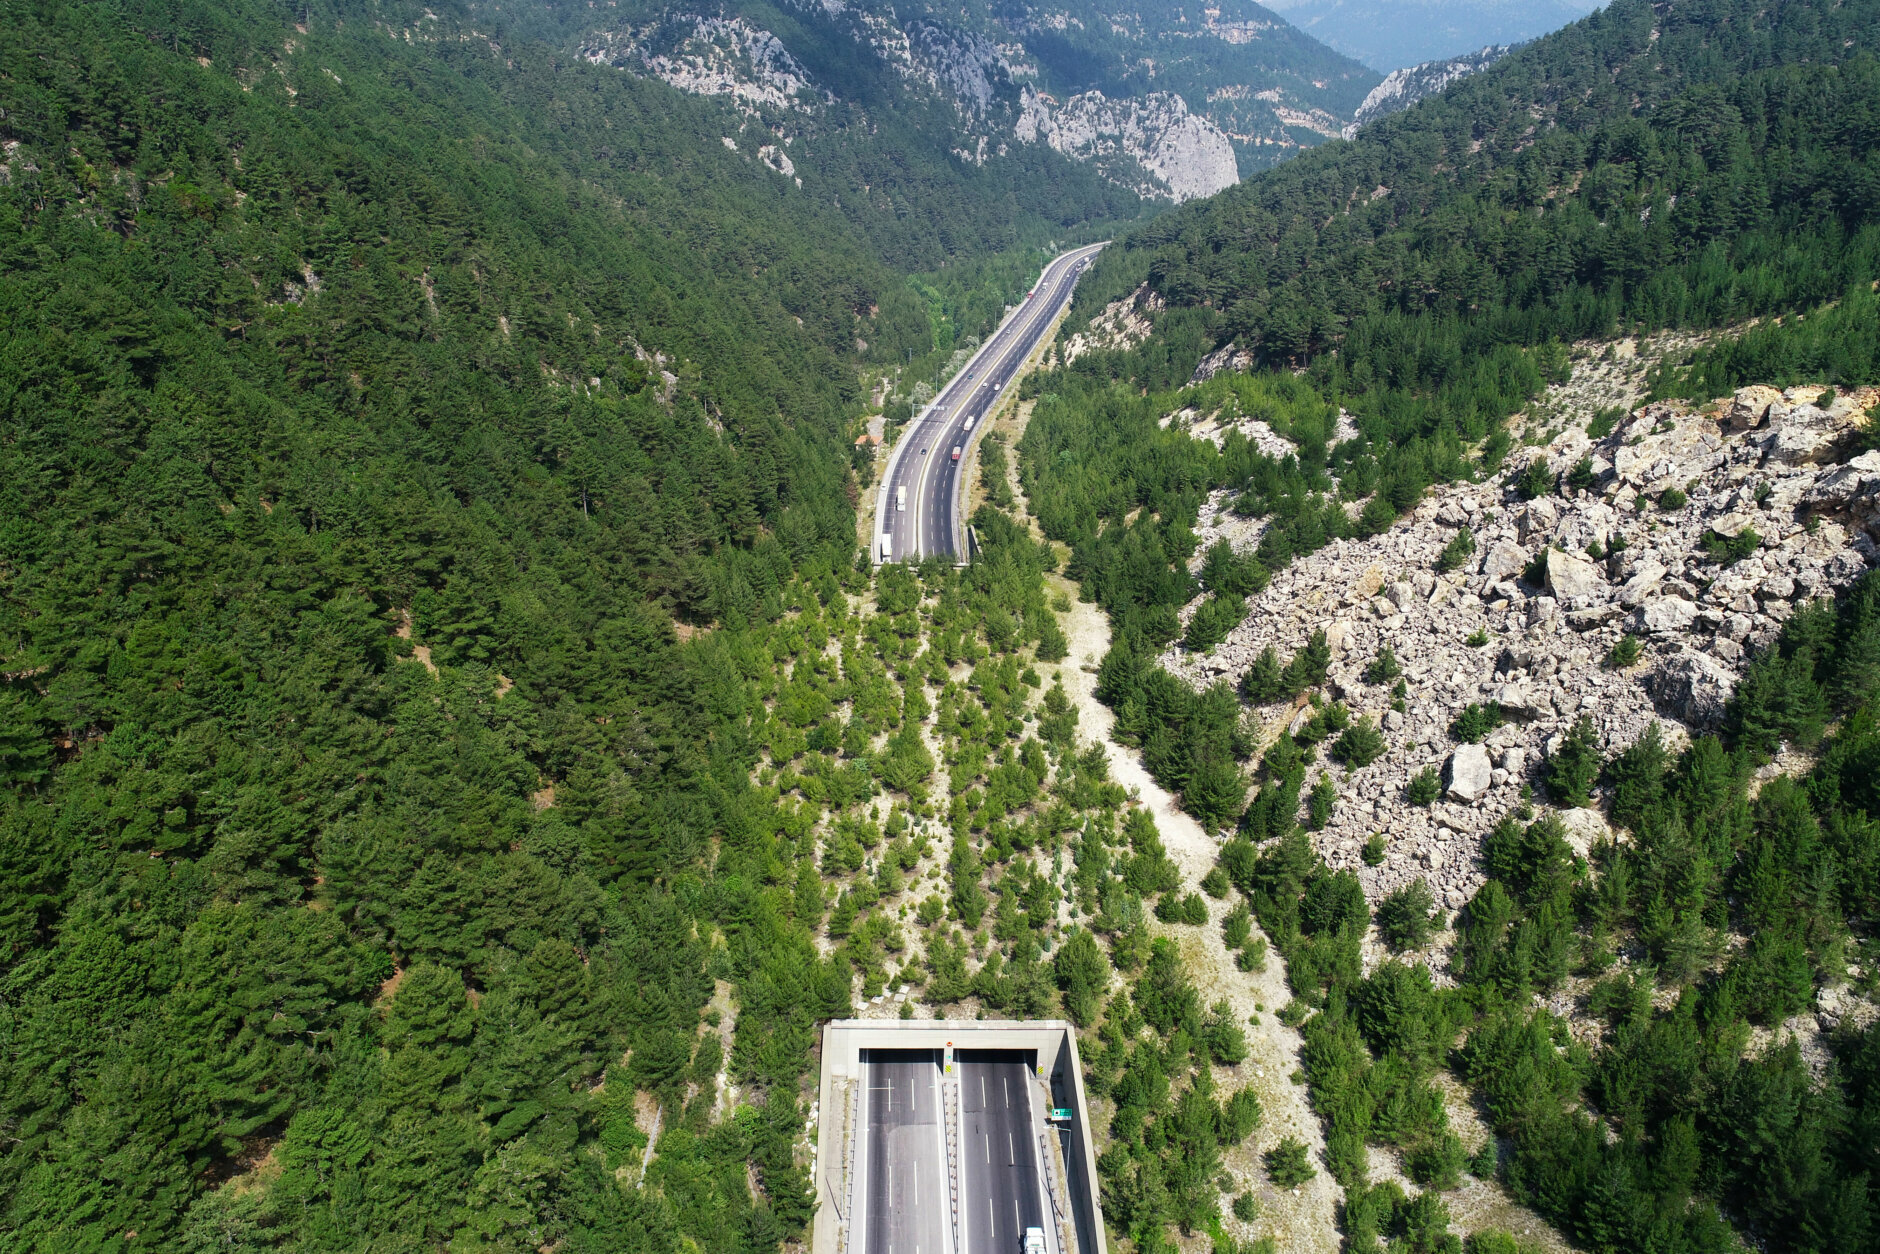 ADANA, TURKEY - JULY 08: A drone photo shows an "ecological overpass" located at Tarsus-Pozanti Highway in Adana, Turkey on July 08, 2020. "Ecological bridges", where animals cross safely, have been built on highways by the Turkish Ministry of Transport and Infrastructure to protect both wild animals and prevent traffic accidents caused by wildlife. (Photo by Eren Bozkurt/Anadolu Agency via Getty Images)